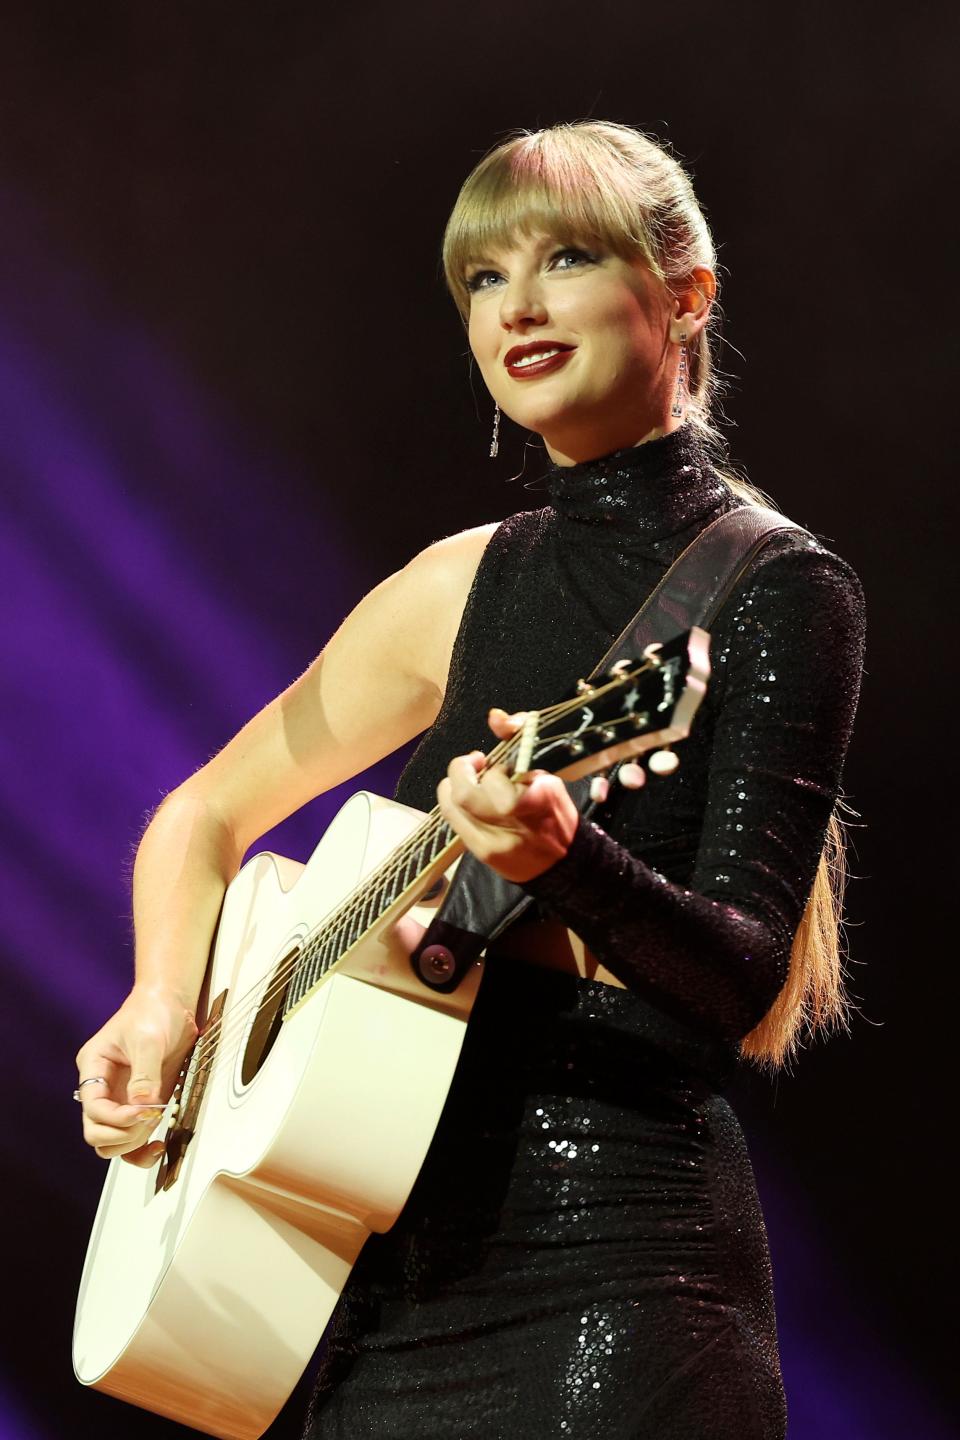 Taylor Swift performs onstage during NSAI 2022 Nashville Songwriter Awards in Nashville on Sept. 20, 2022. She releases her 10th album, &quot;Midnights,&quot; on Oct. 21.